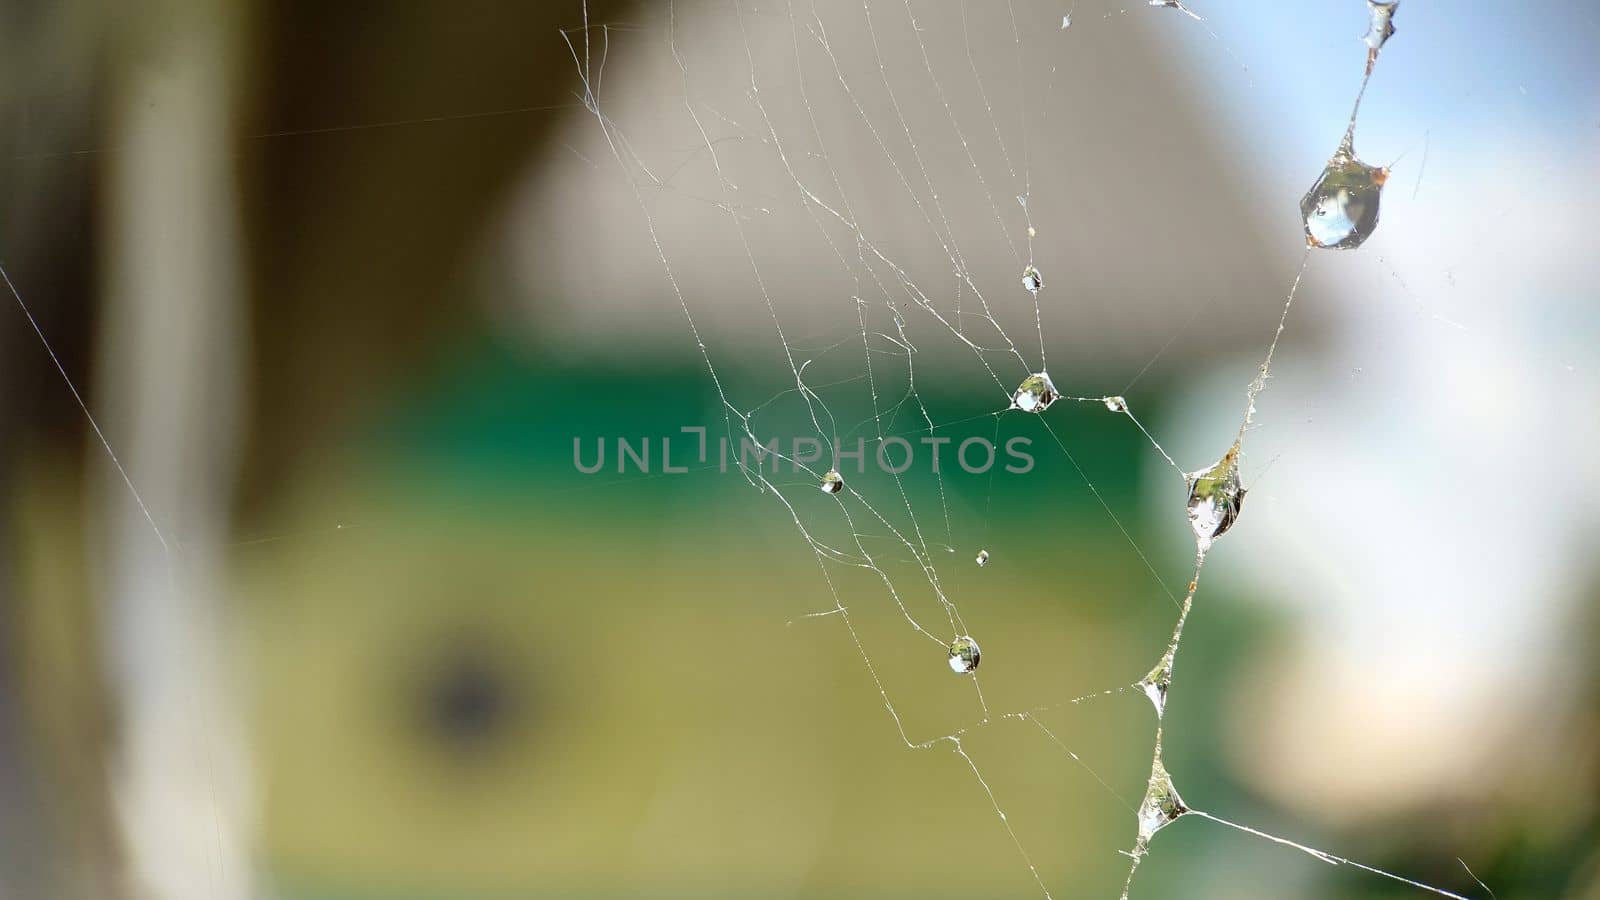 There are dew droplets on the web in close-up.Macrophotography.Selective focus.